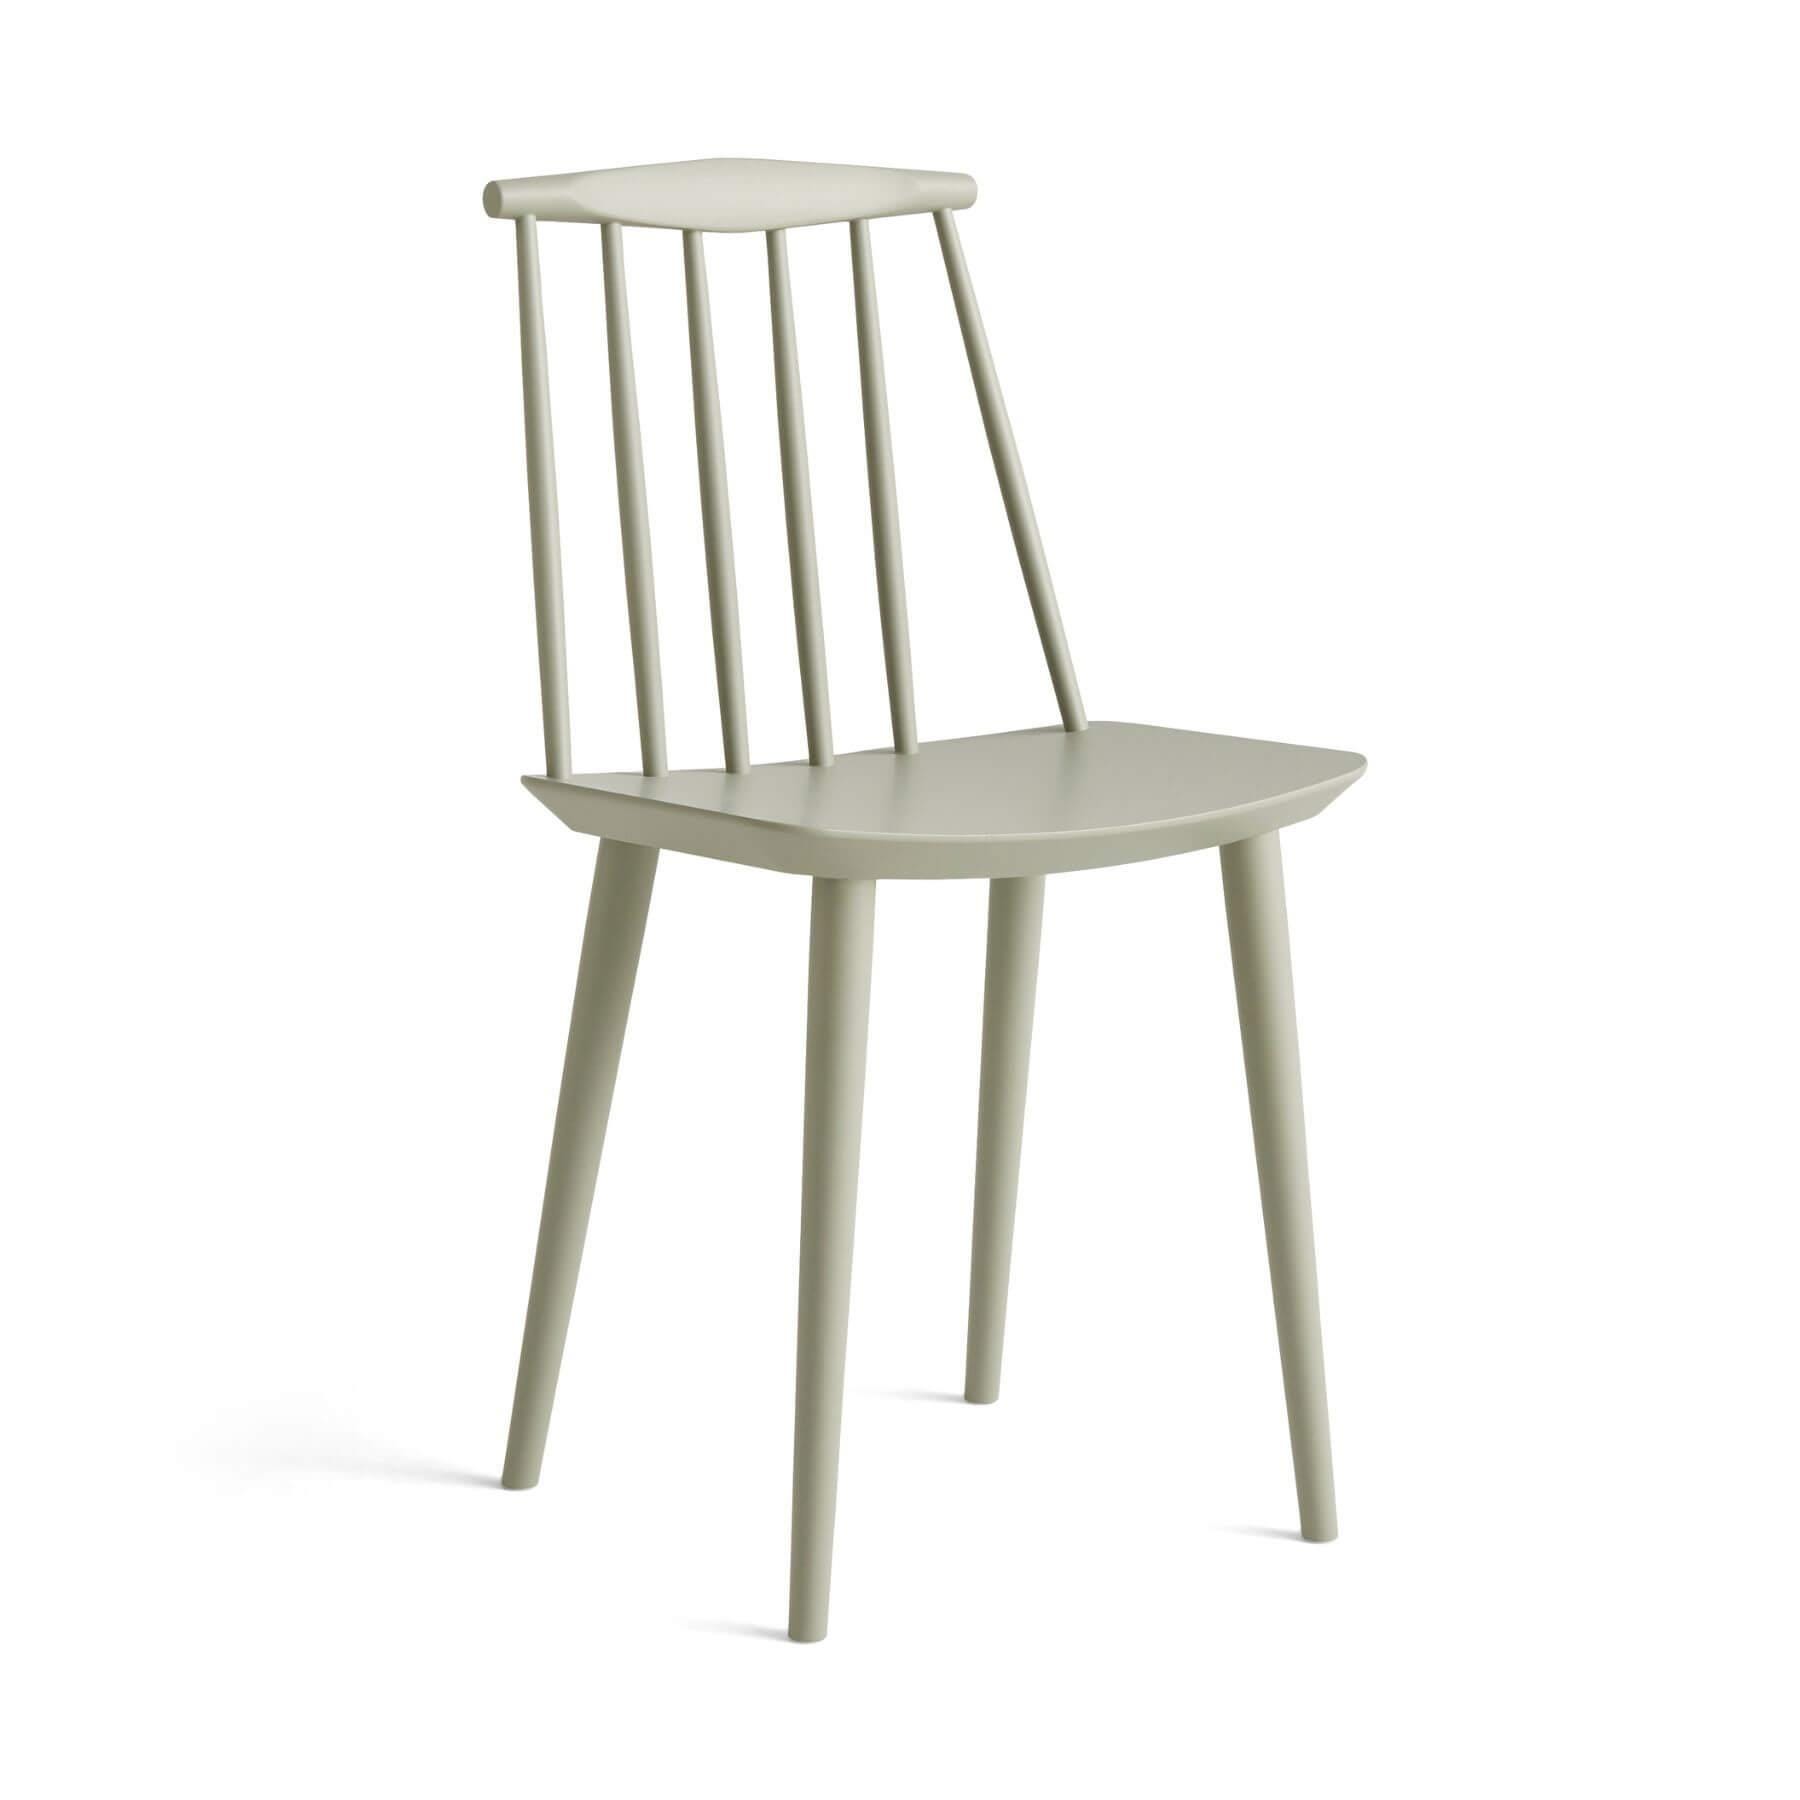 Hay Jseries 77 Dining Chair Beech Lacquered Sage Green Designer Furniture From Holloways Of Ludlow